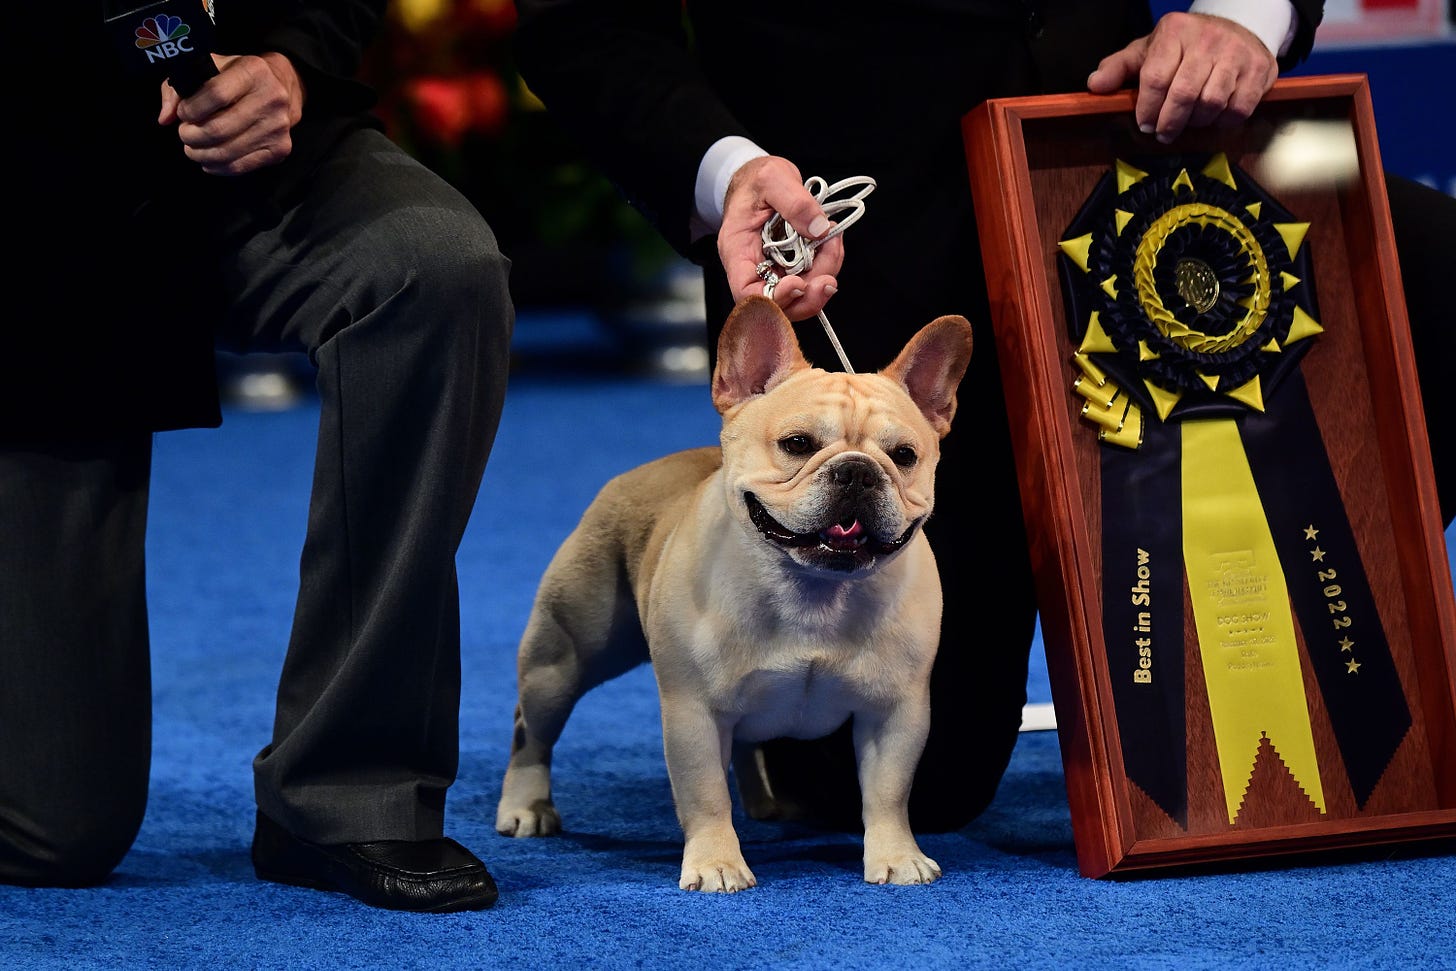 Image: Winston, the French bulldog who won the National Dog Show, with his ribbon